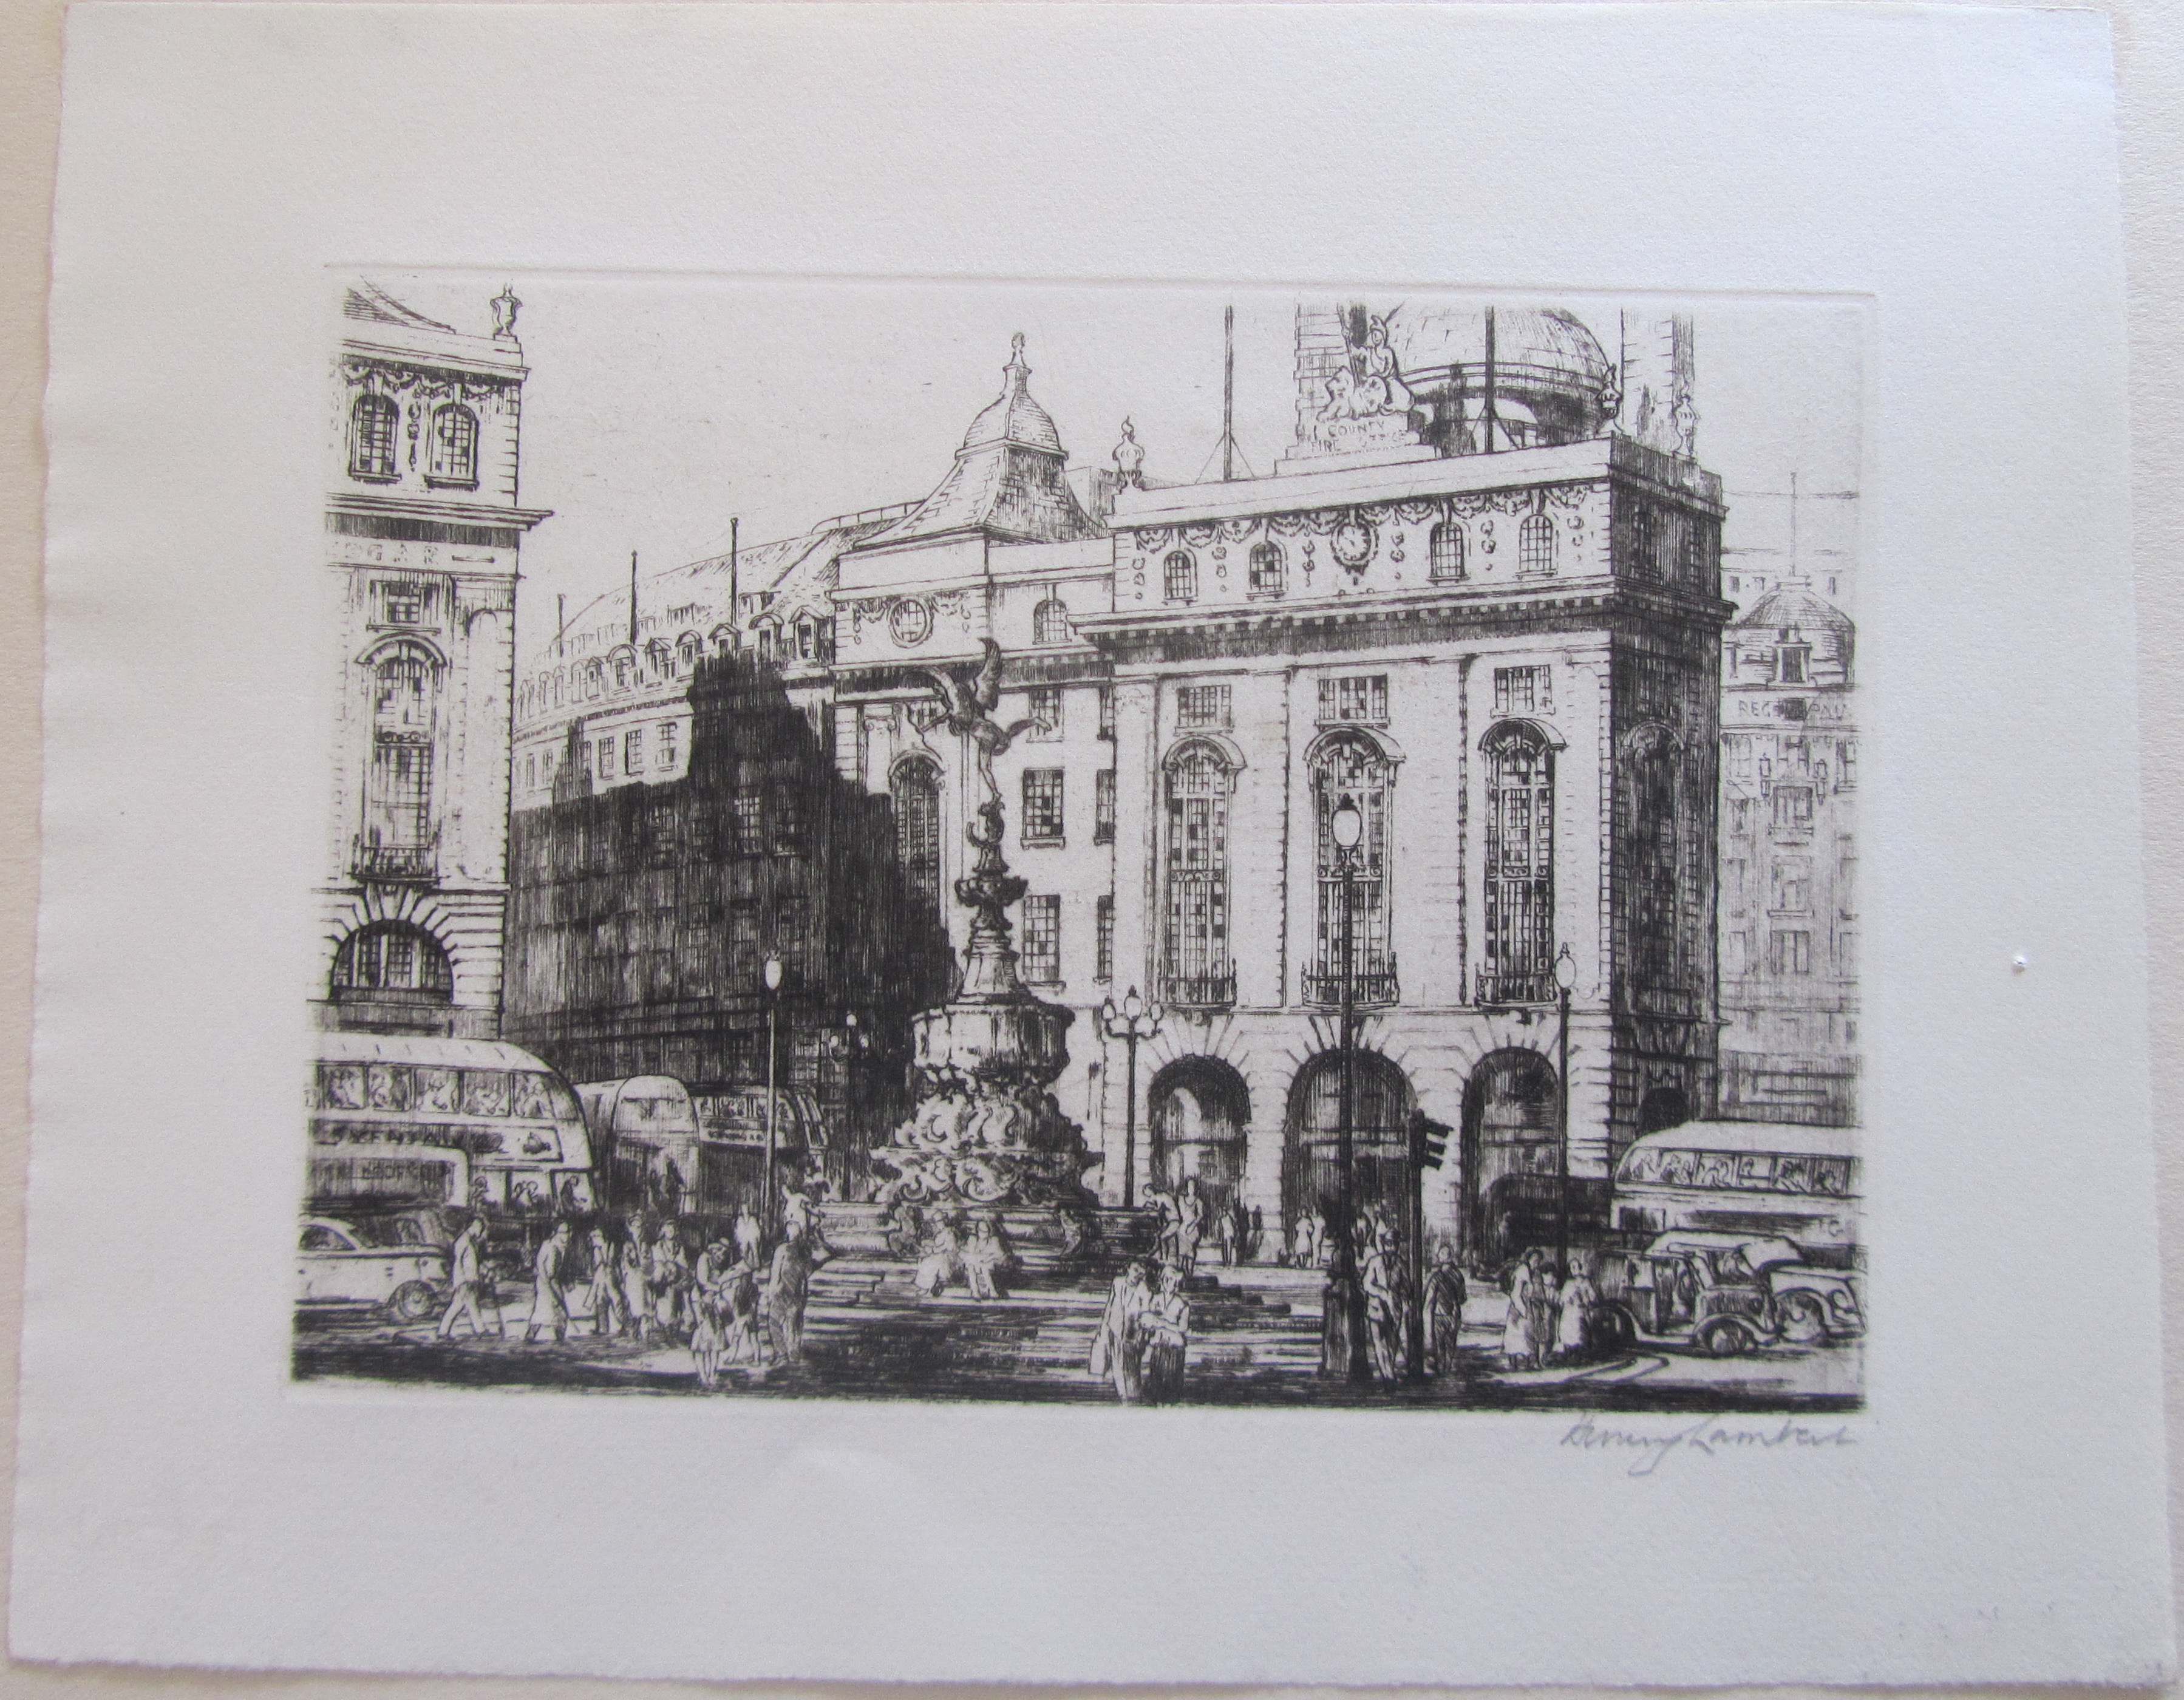 Terence Henry Lambert (British, b.1891) 'Piccadilly Circus' & Lincoln's Inn' London, etchings - Image 4 of 5